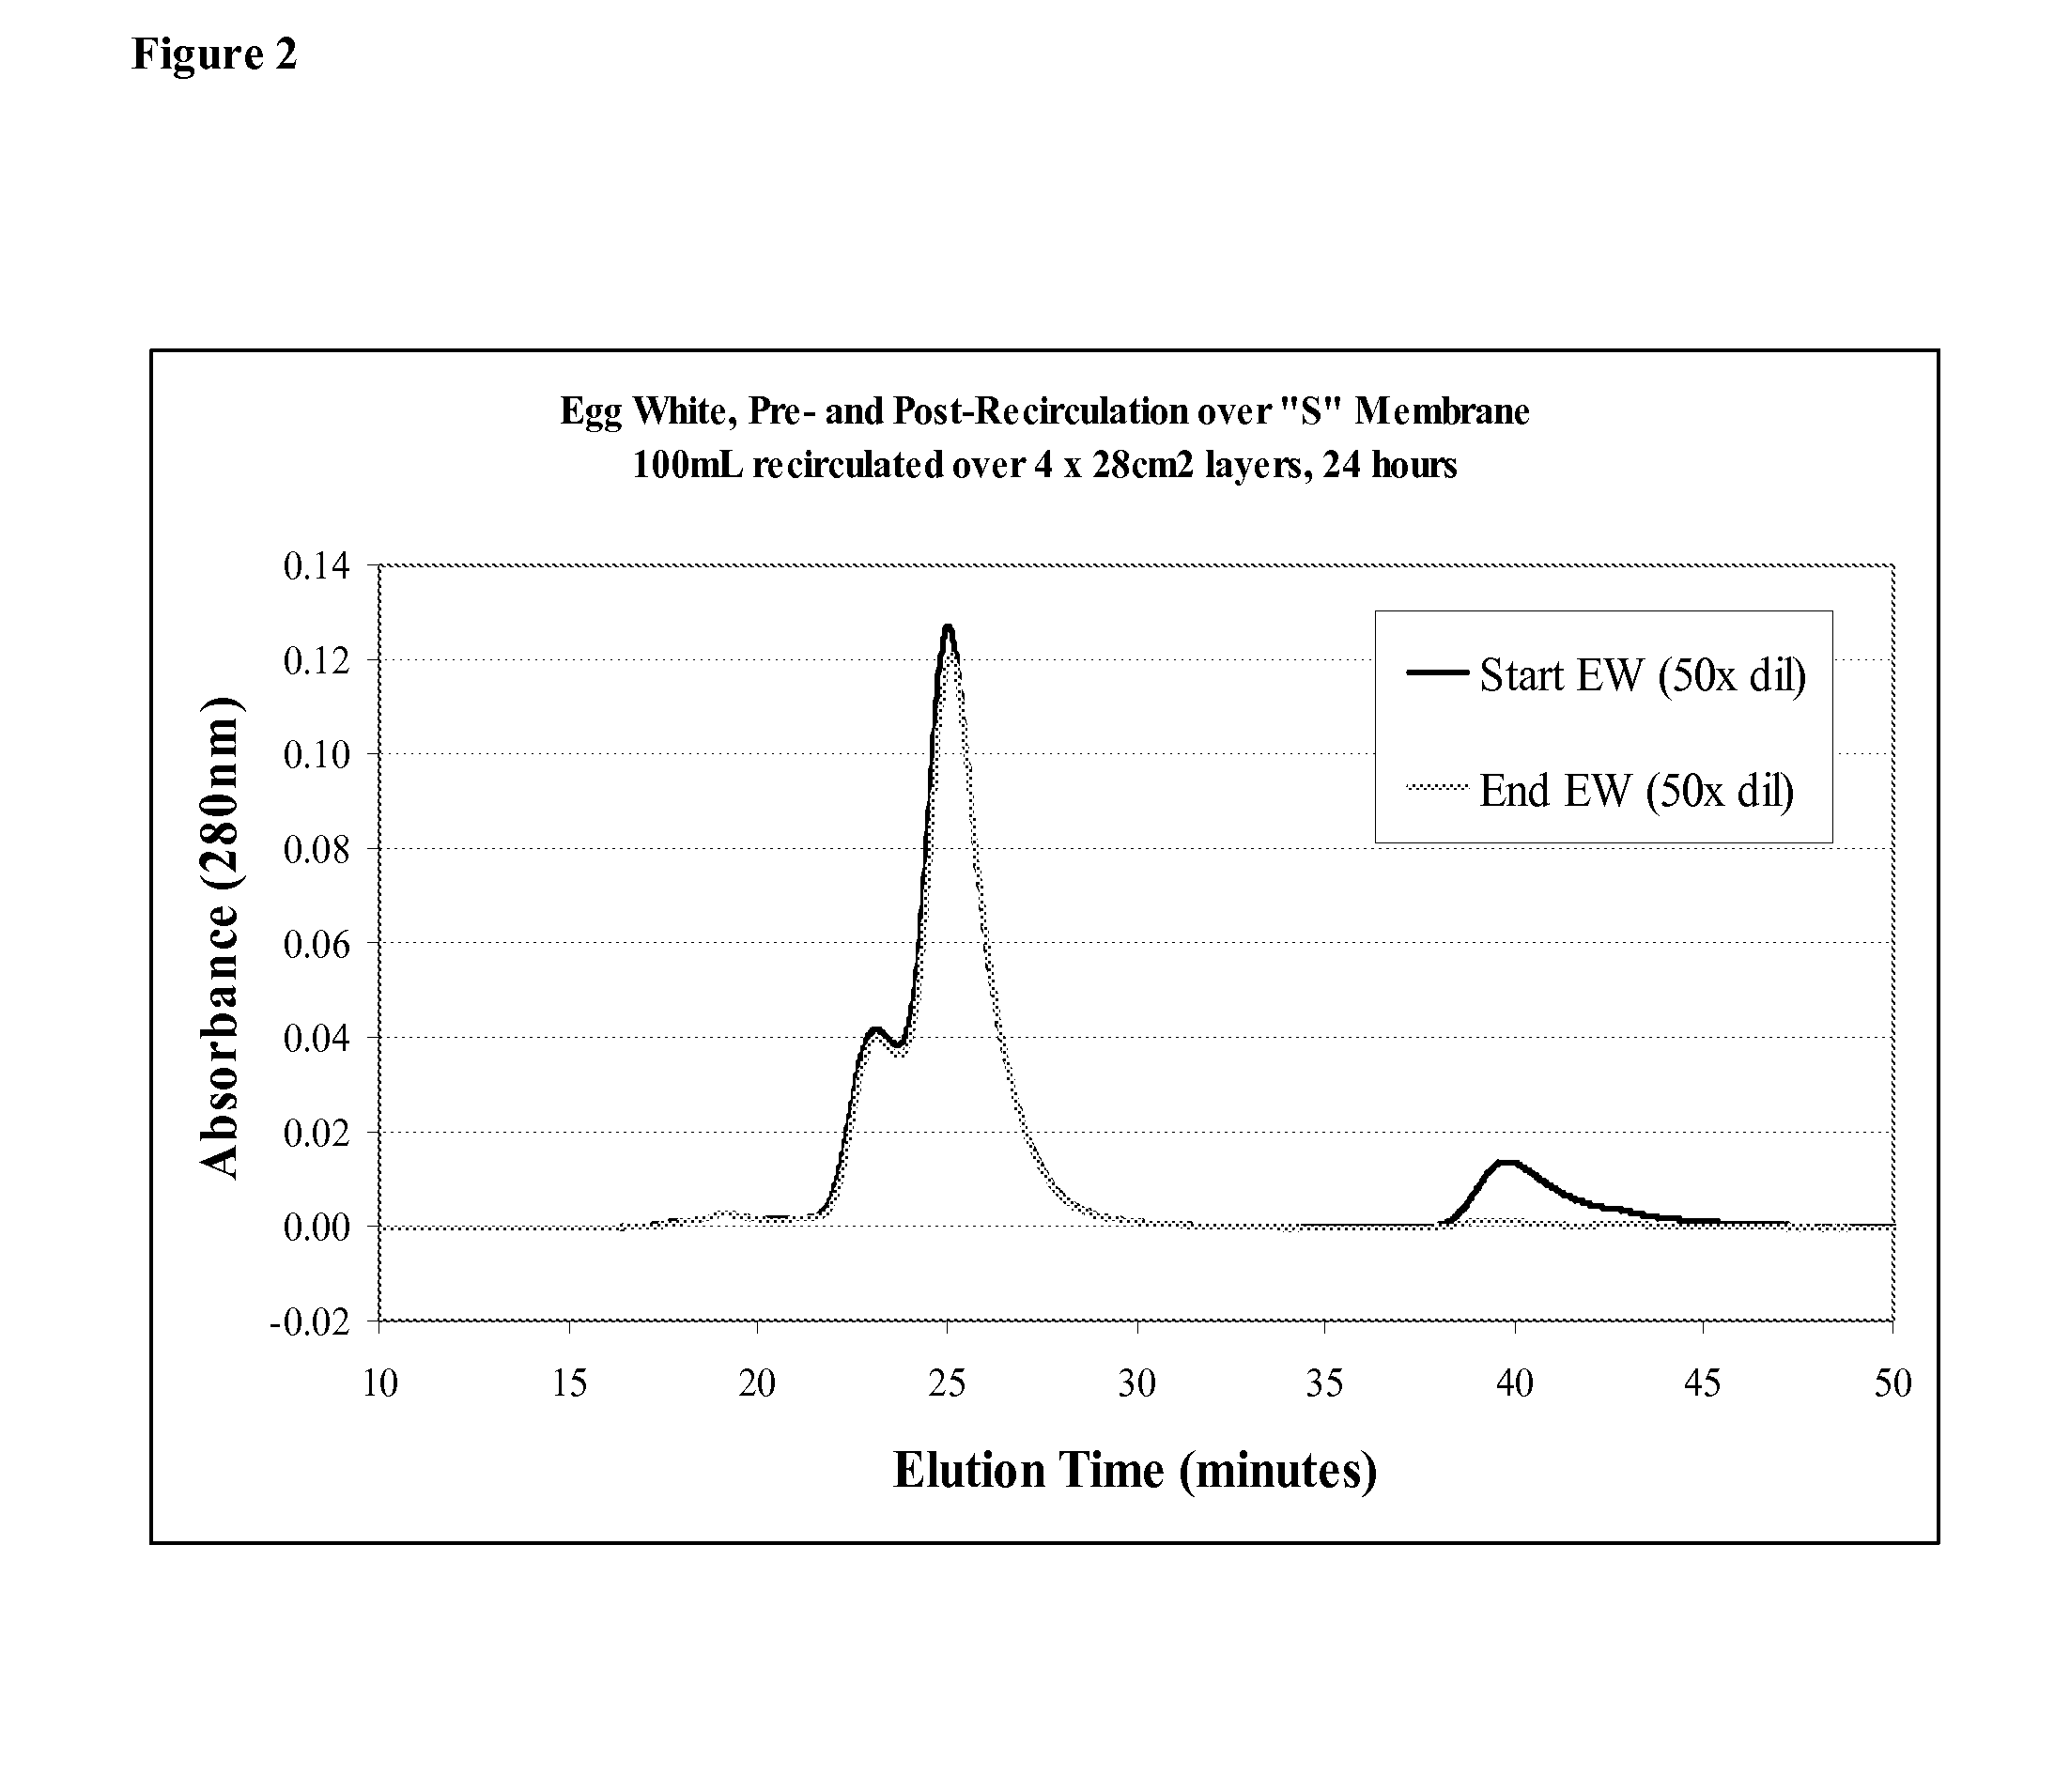 Chromatography Membranes, Devices Containing Them, and Methods of Use Thereof